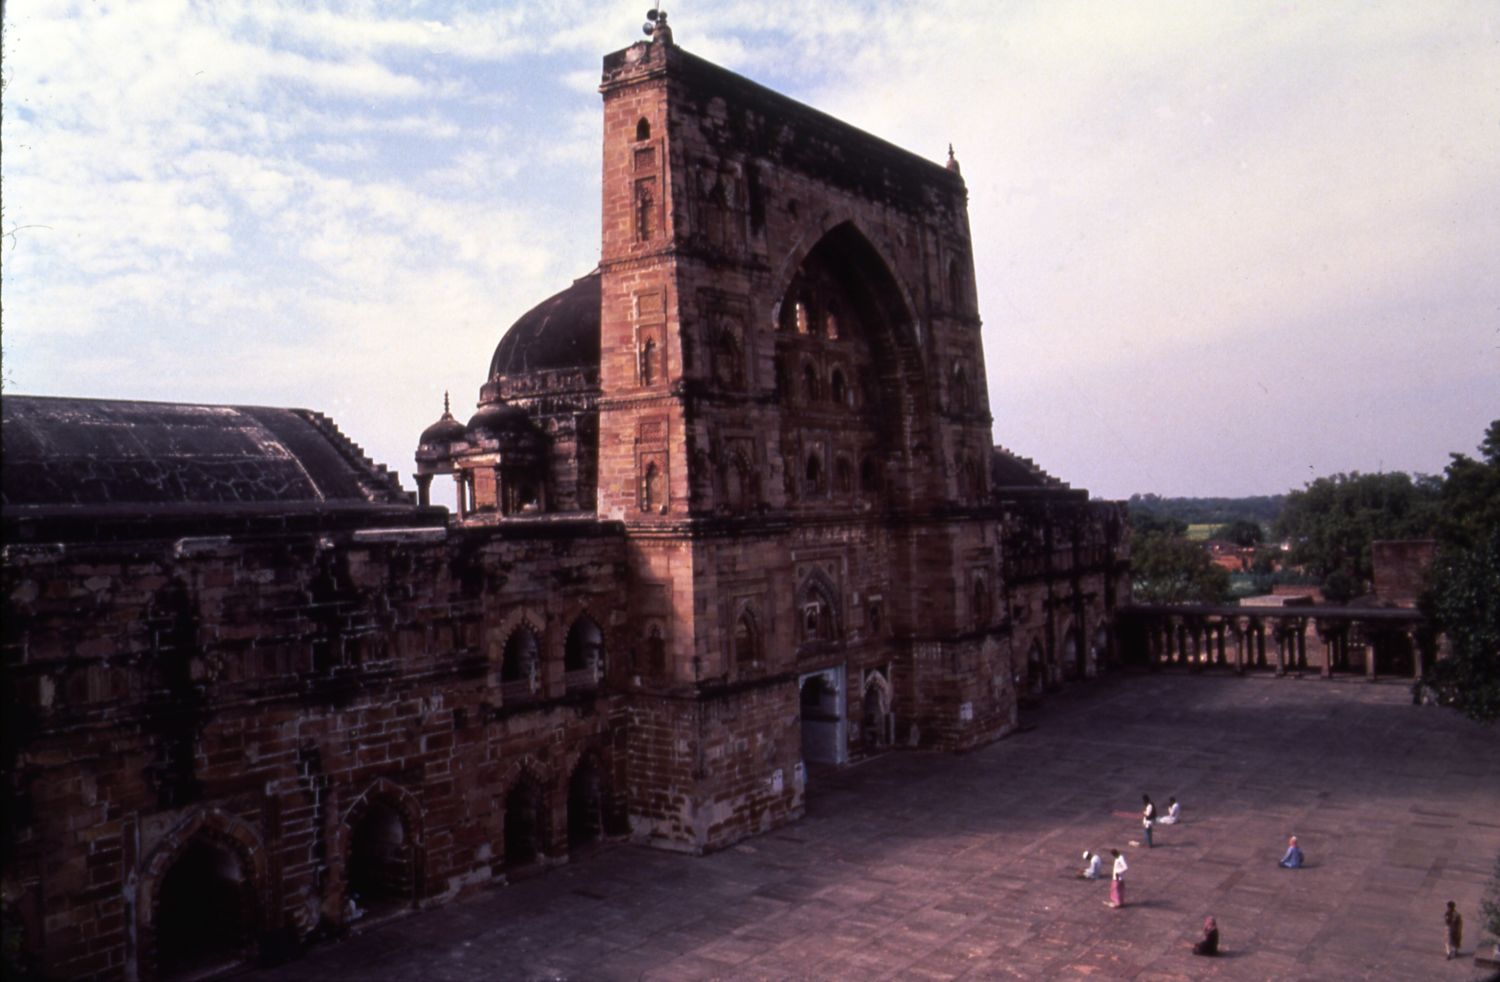 View of the western side of the courtyard, showing prayer hall and its portal